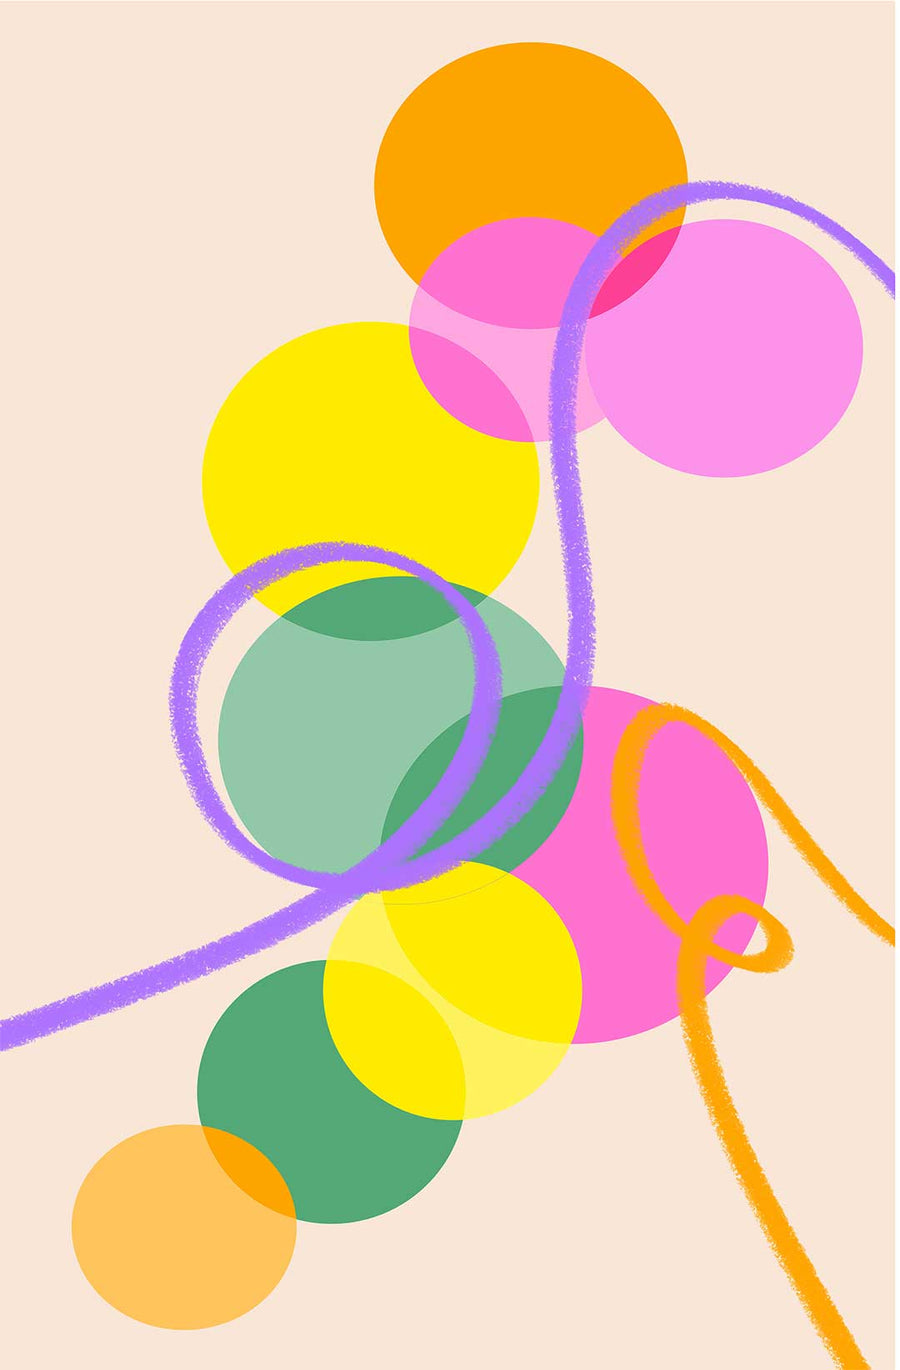 Digital painting of a pale pink background with bold colourful circles overlapping with crayon effect squiggly lines flowing through. The picture gives a feeling of playfulness and happiness.